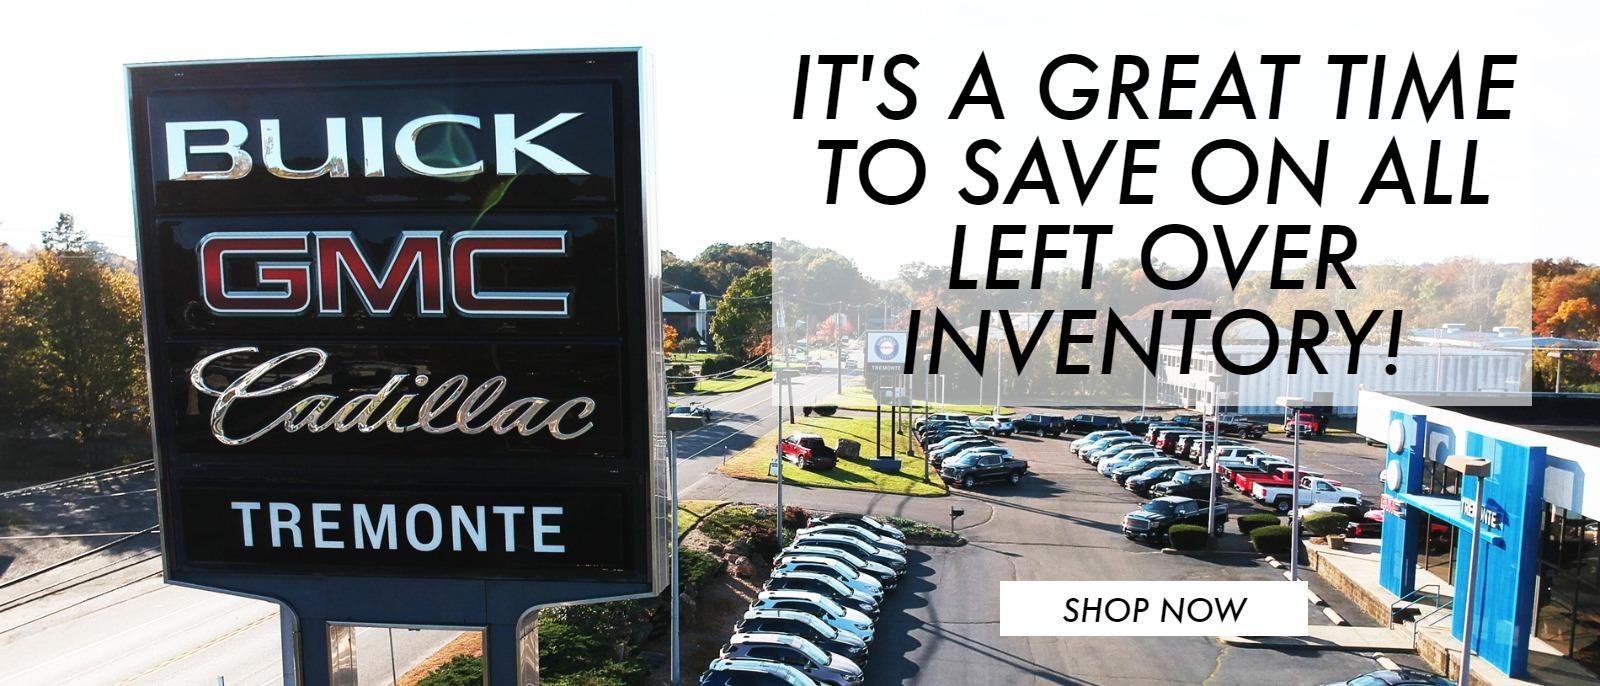 It's a great time to save on all left over Inventory